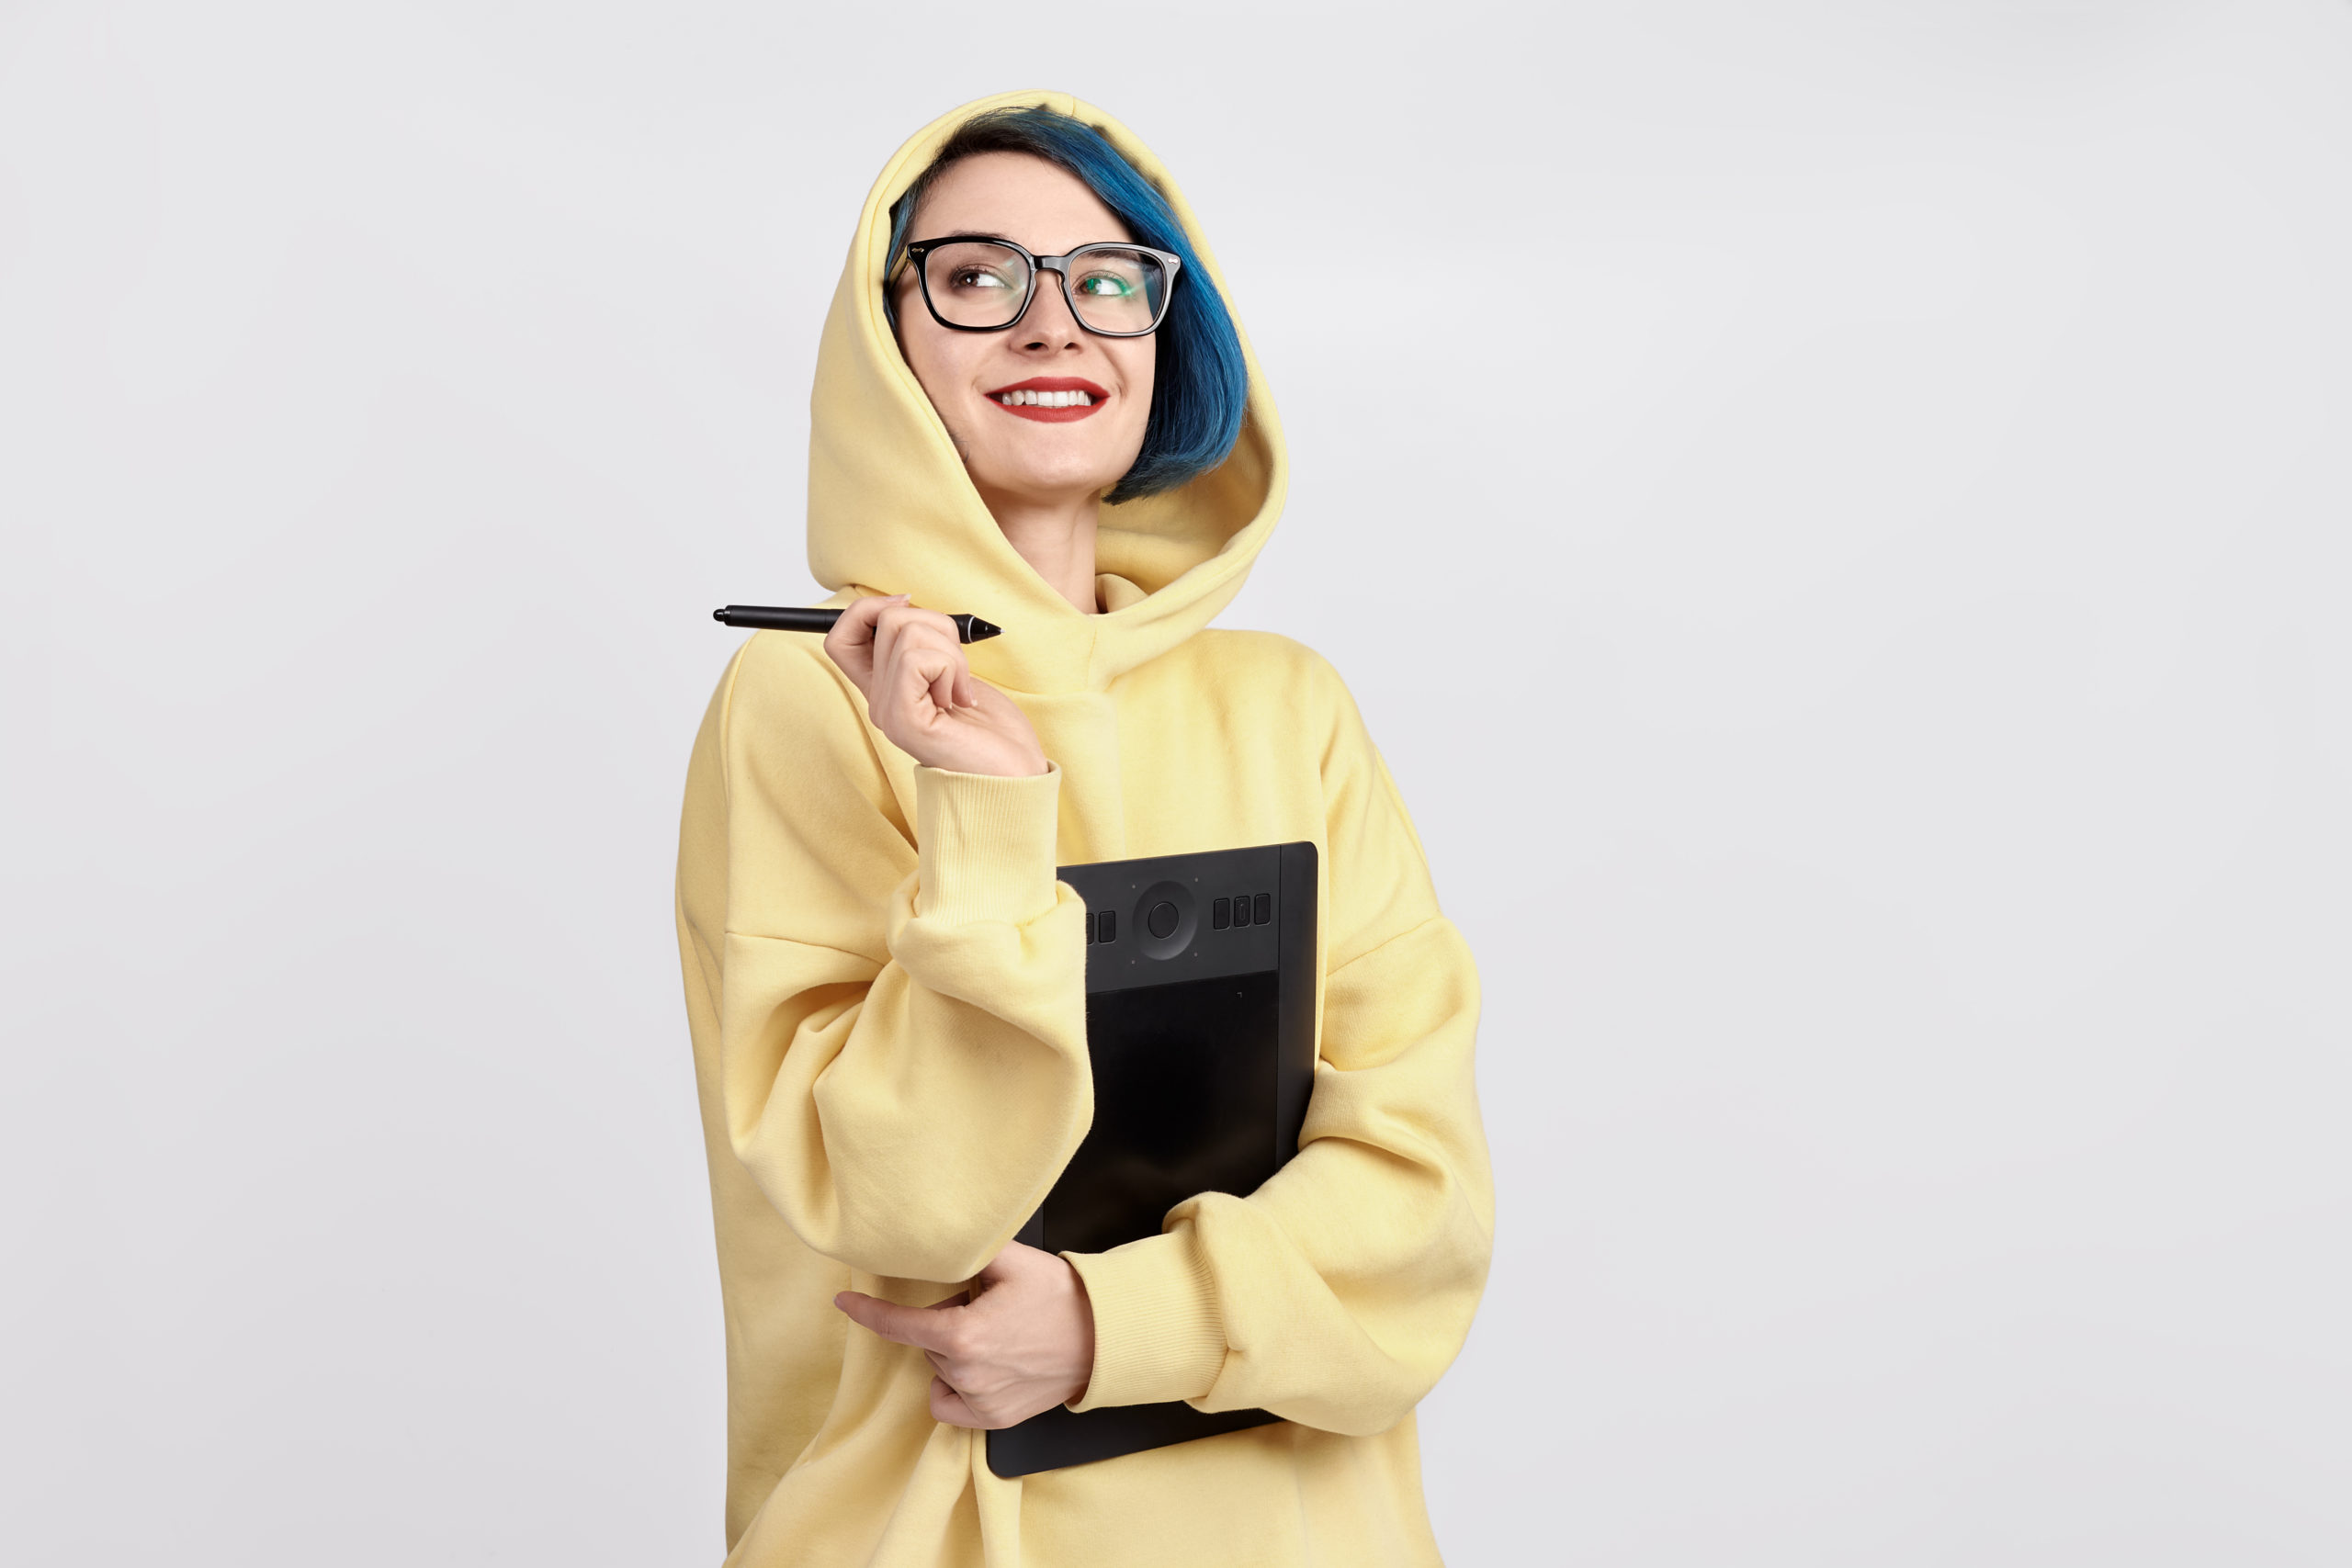 Young woman with blue hair and glasses in yellow hoodie holds a laptop or tablelet